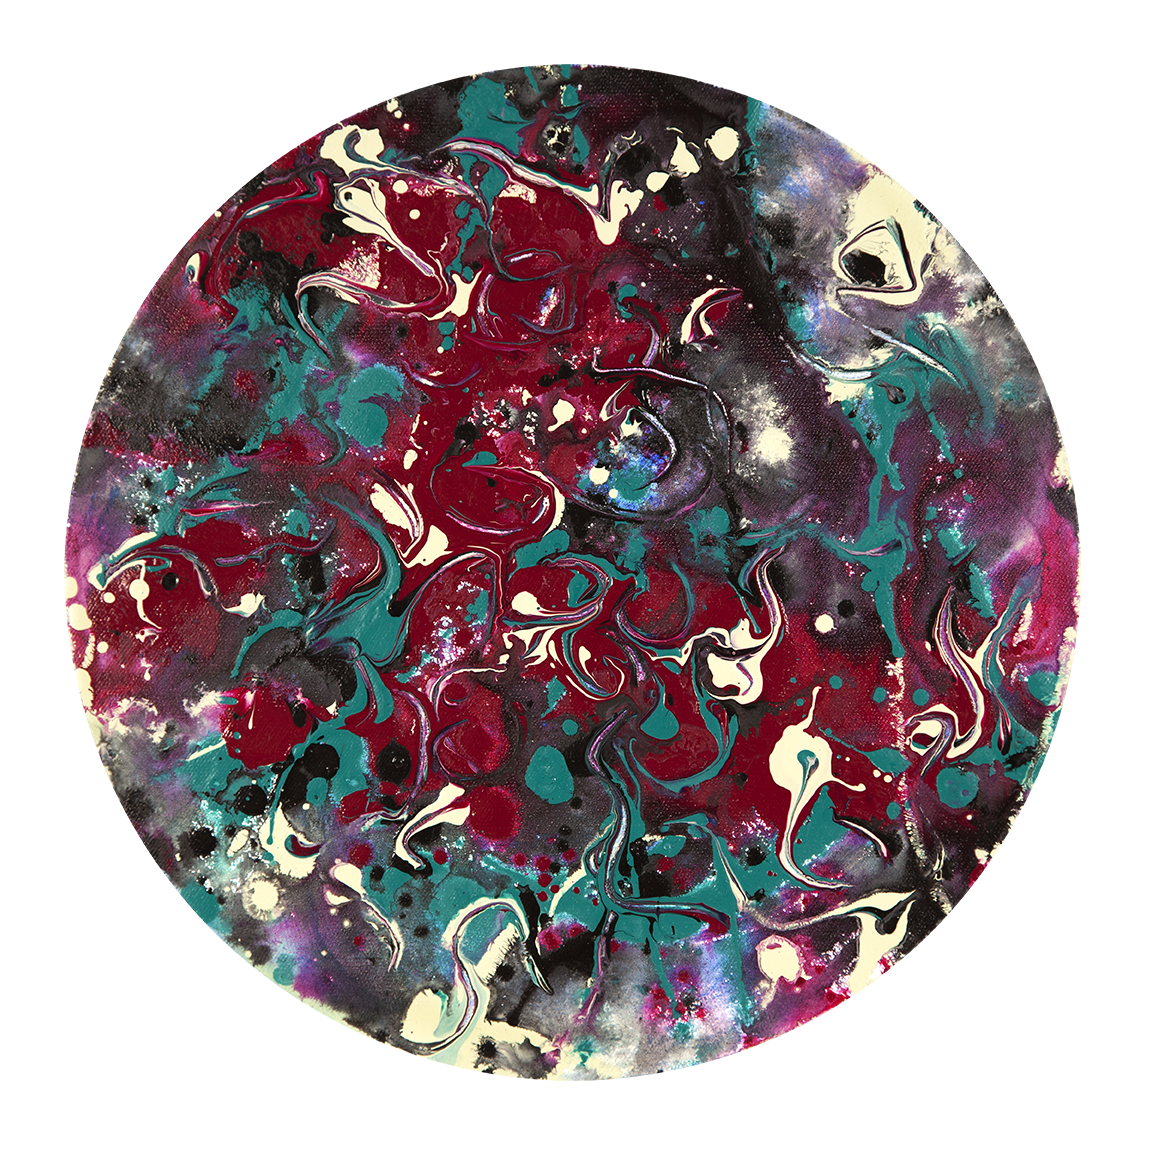 ©2021 Alicia R Peterson, *Swirl, Twirl and Be*. Acrylic on 12-inch diameter canvas. Photographer: Peter Scheer.